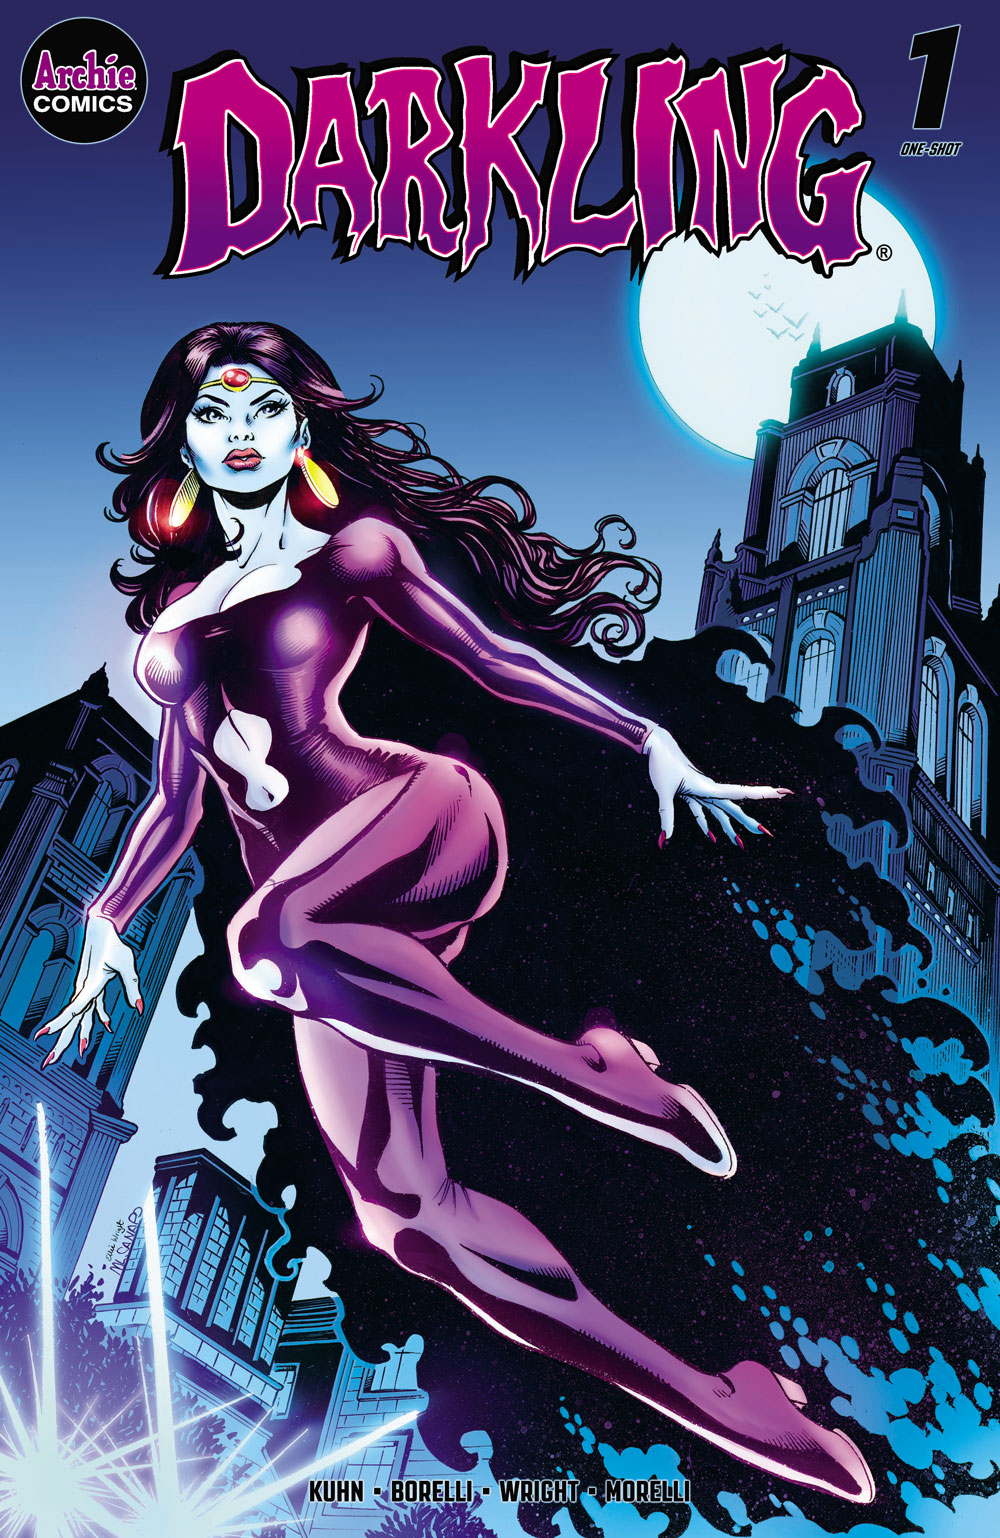 The cover of DARKLING #1. Darkling, an Asian woman in a black cloak and purple superhero costume, floats above Ivy Hollow University, a gothic building, at night.